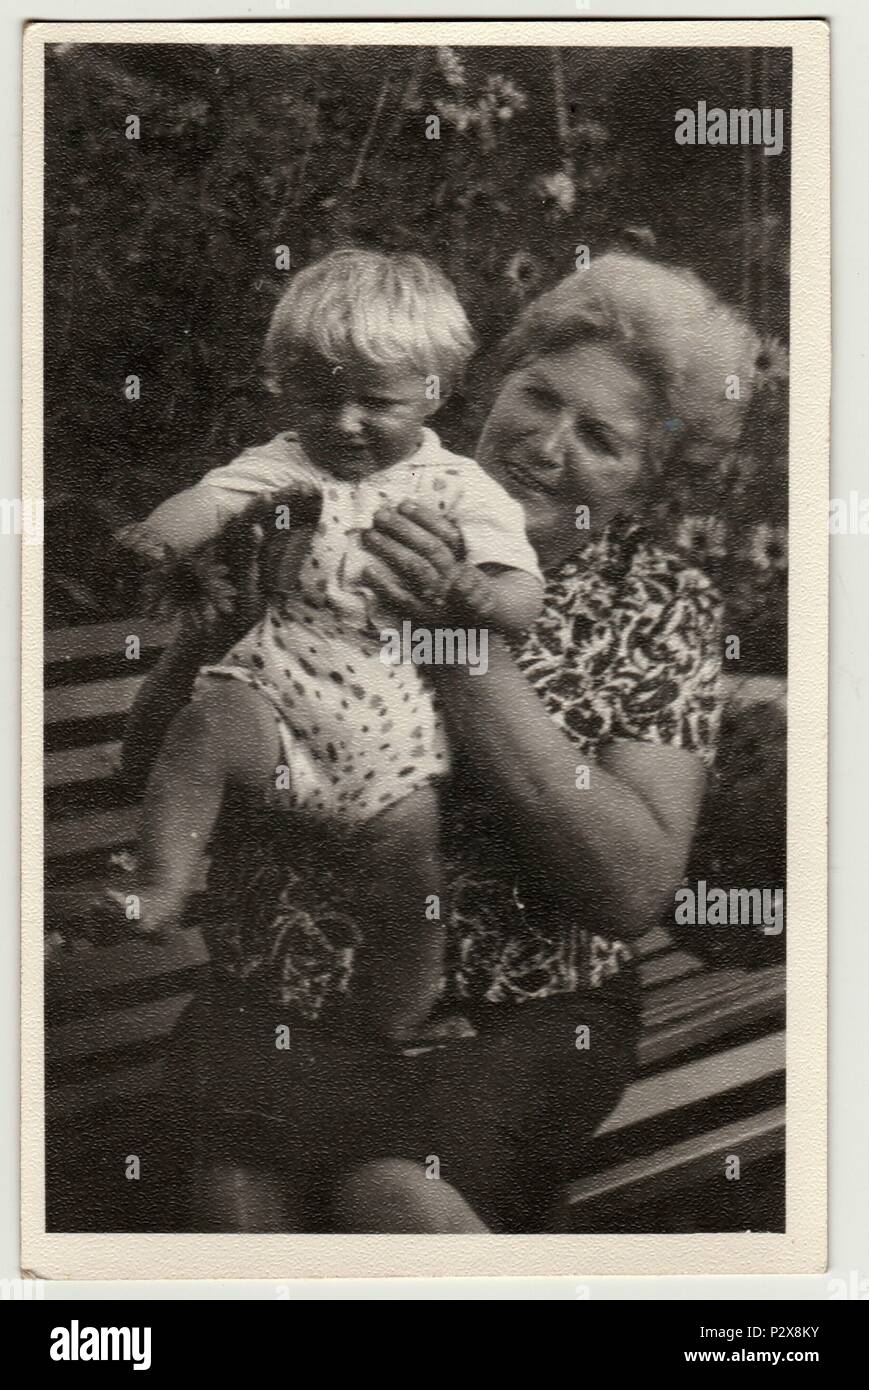 THE CZECHOSLOVAK SOCIALIST REPUBLIC - CIRCA 1950s: Vintage photo shows grandmother holds a small baby. Retro black & white  photography Stock Photo